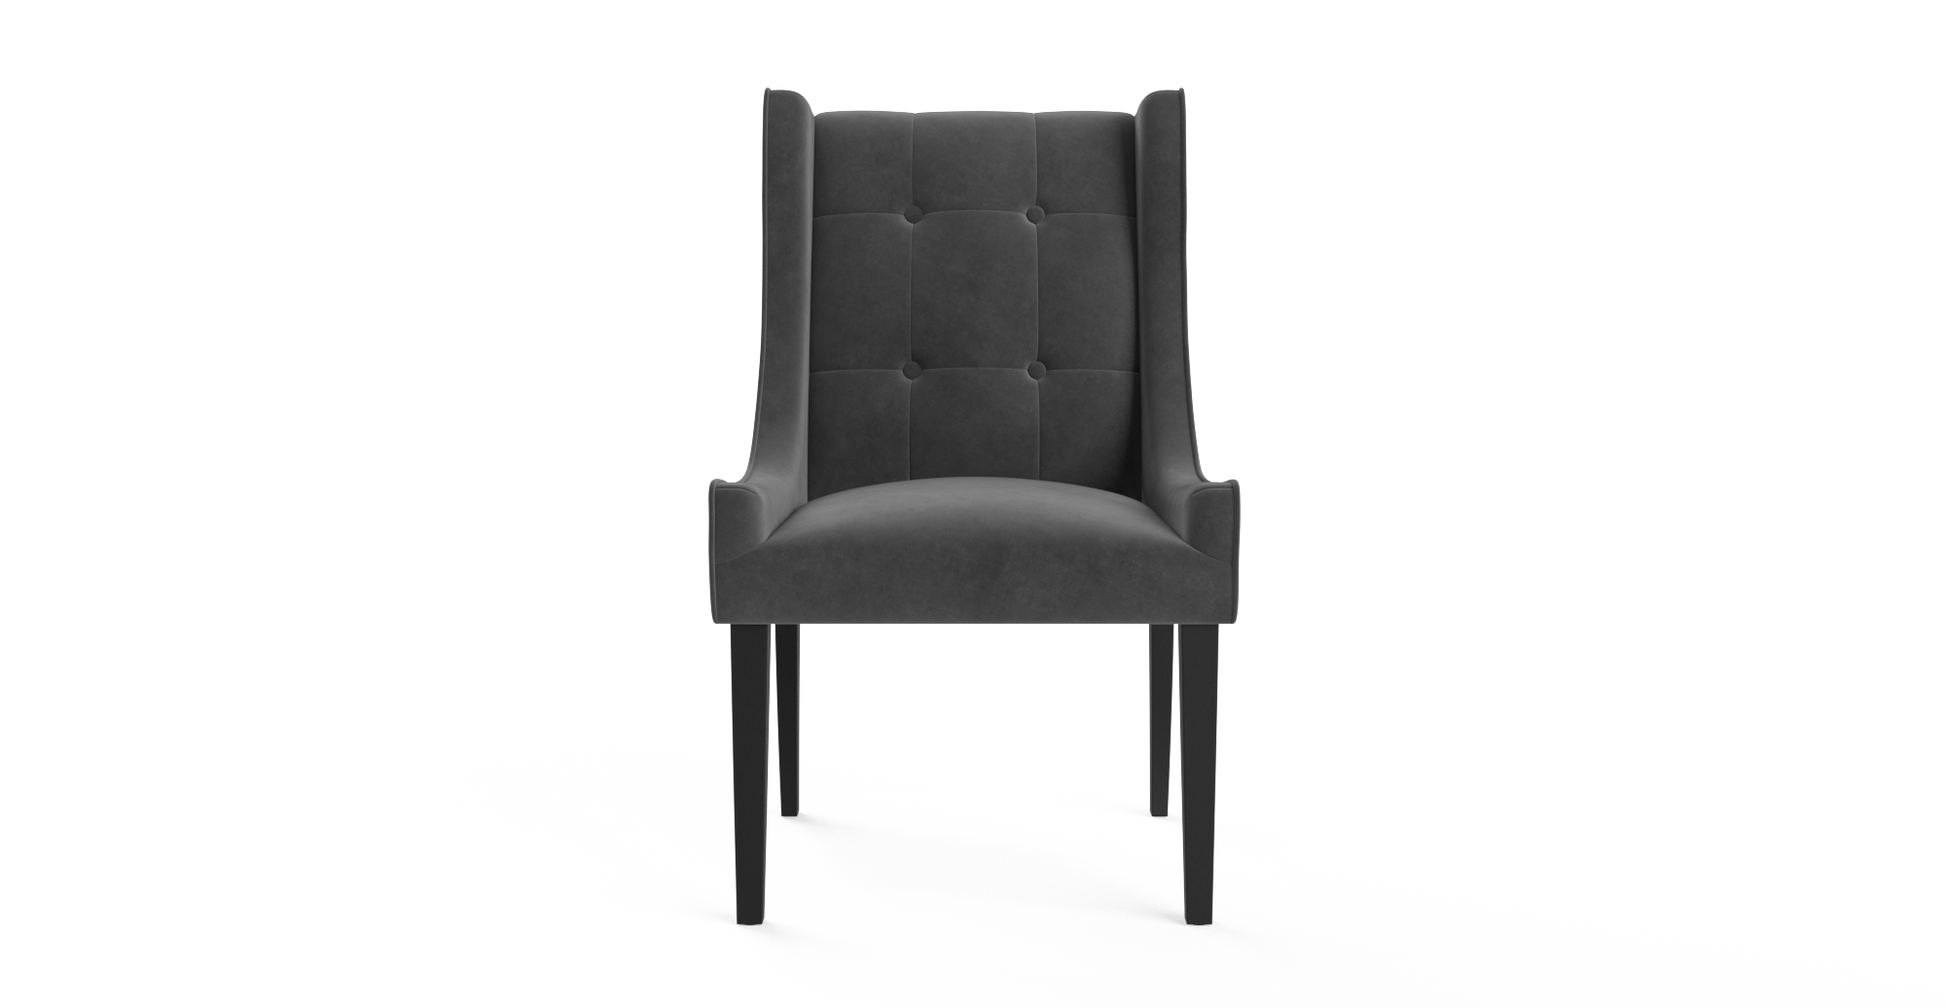 Brosa Ashley Scoop Back Dining Chair  - Cosmic Anthracite/Black)